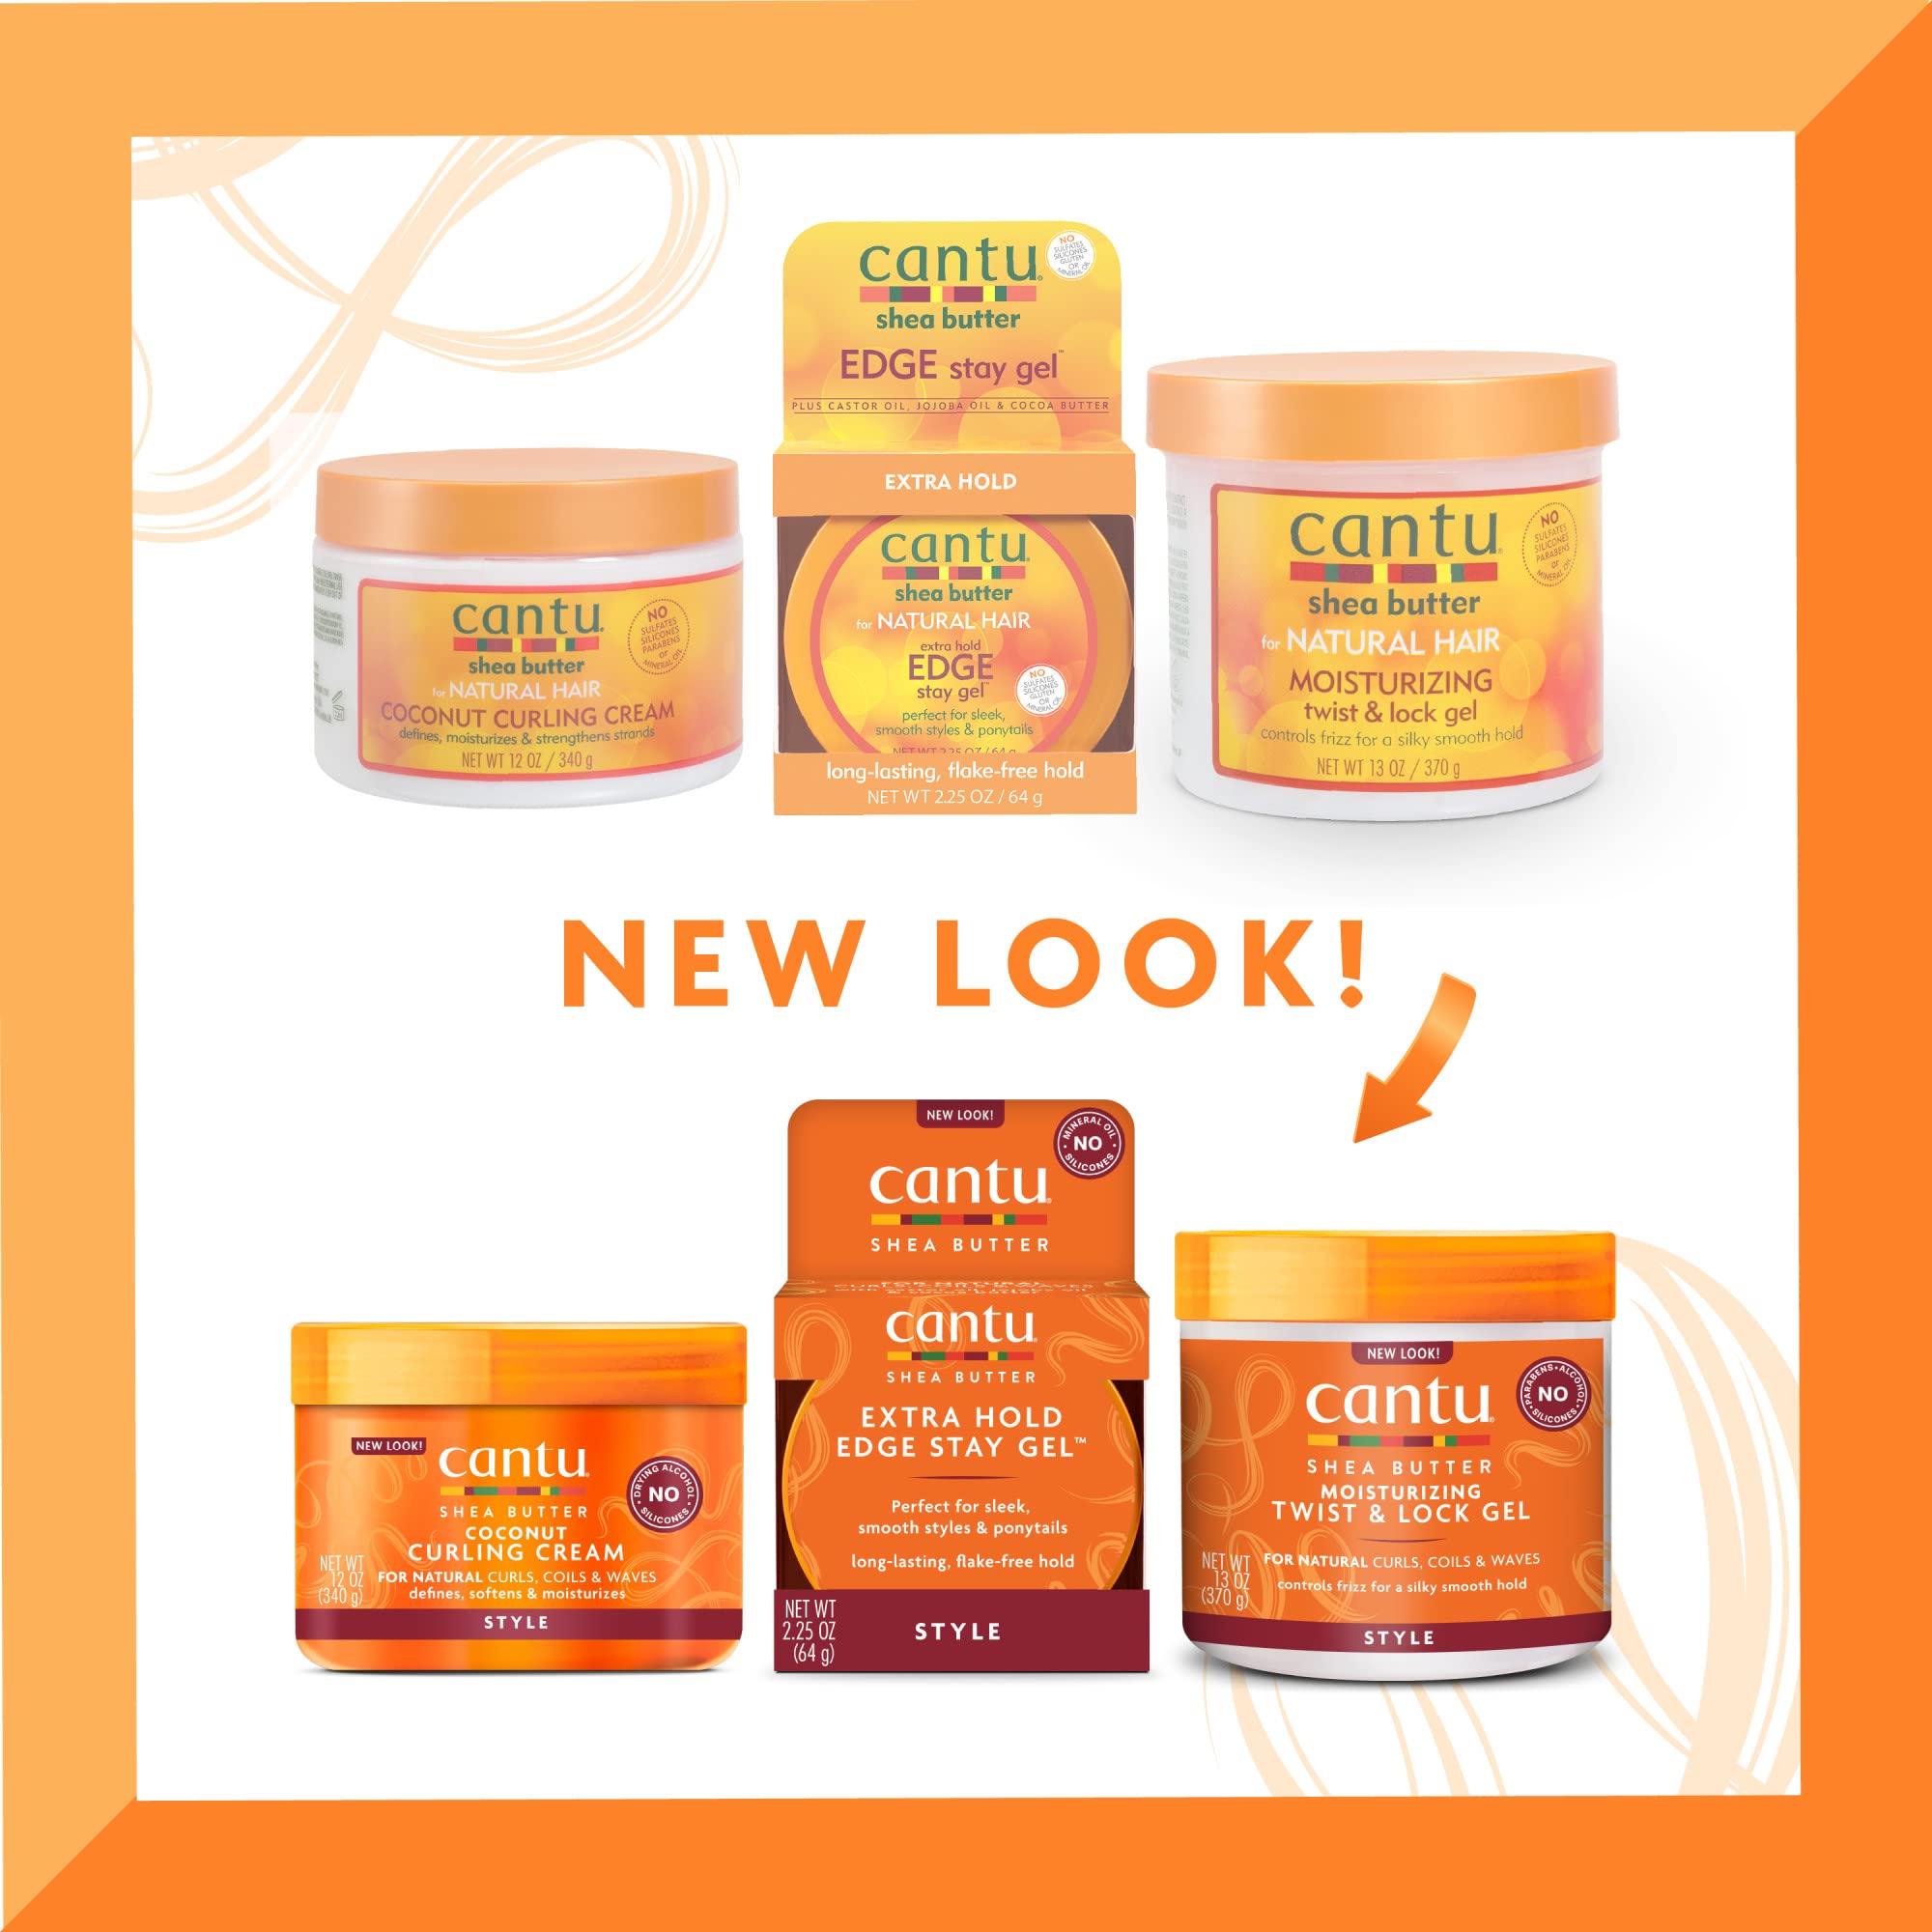 Cantu Hair Treatment Kit with Coconut Curling Cream, Edge Stay Gel, and Twist & Lock Gel with Shea Butter for Natural Hair (Packaging May Vary)